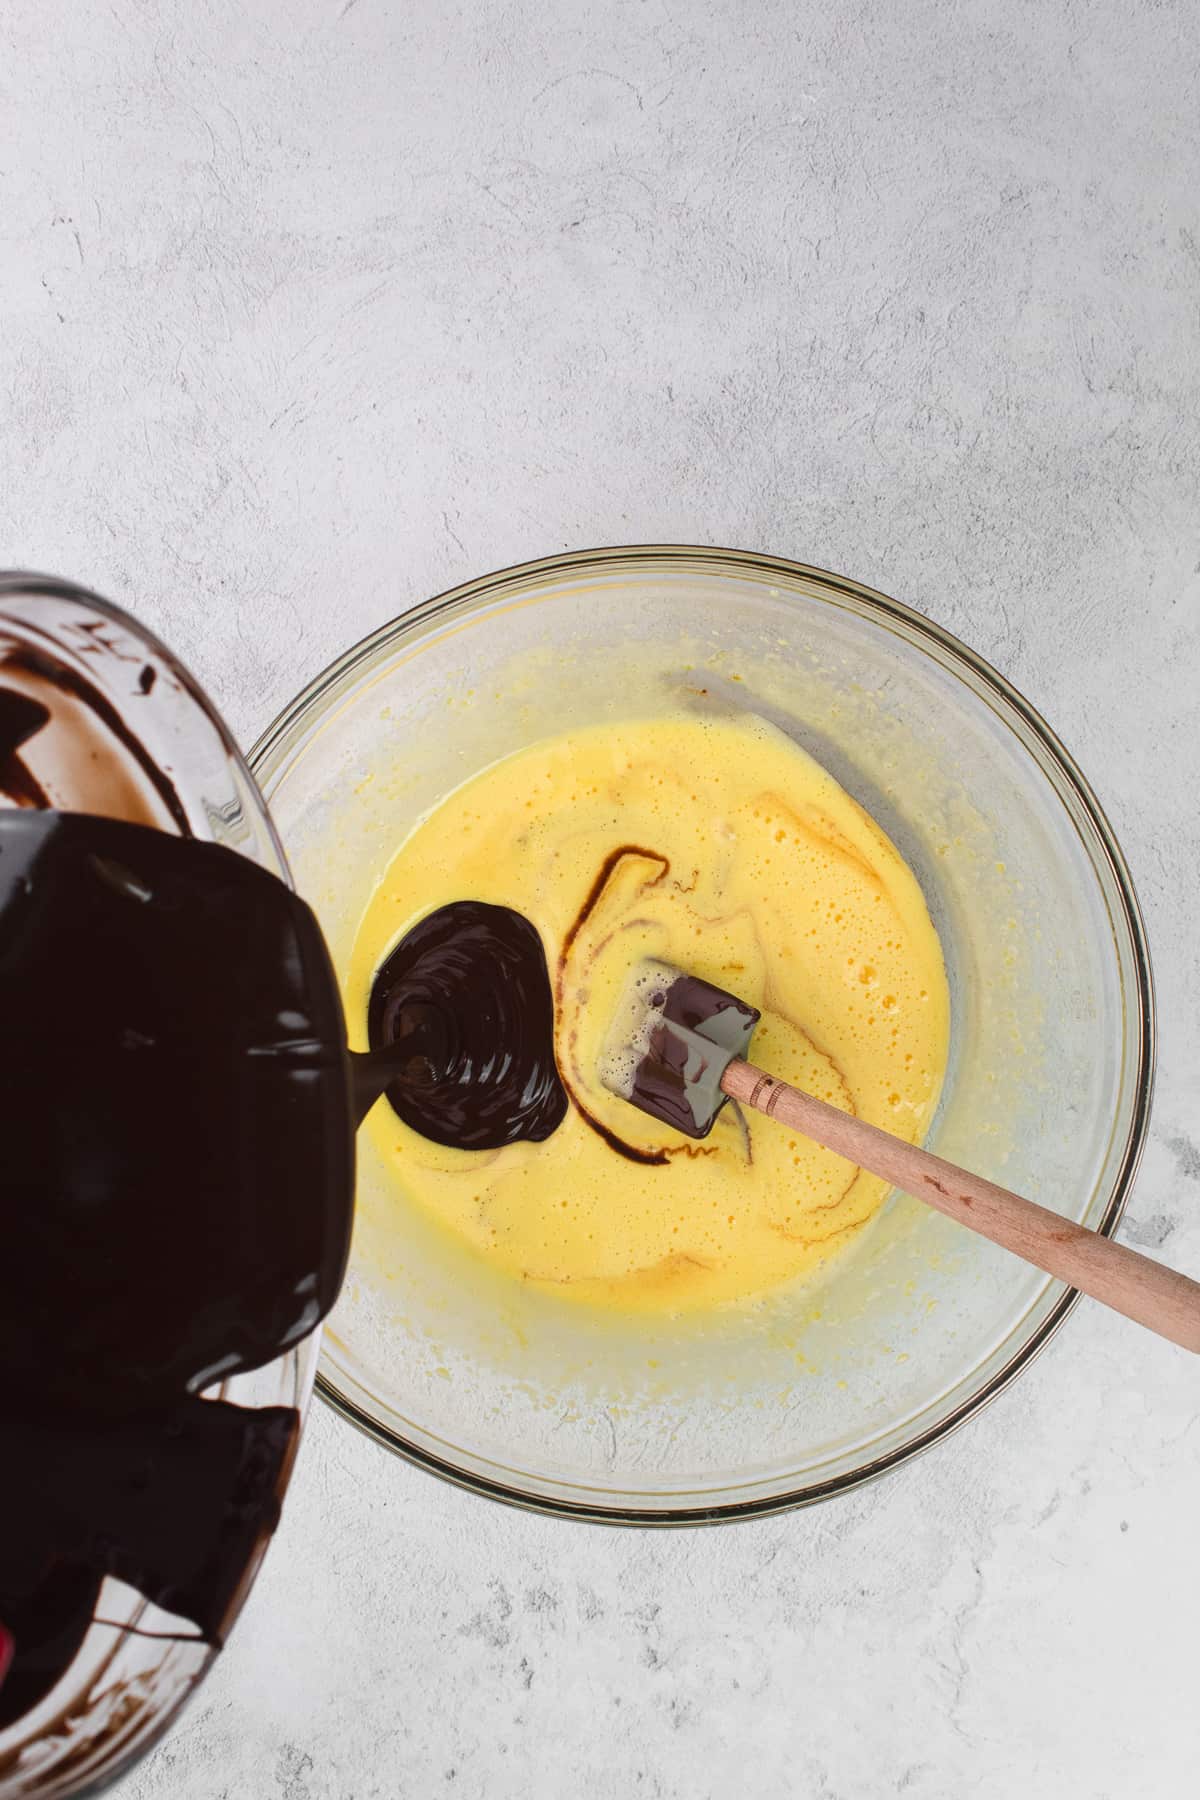 Melted chocolate is added into the bowl of whipped egg yolks